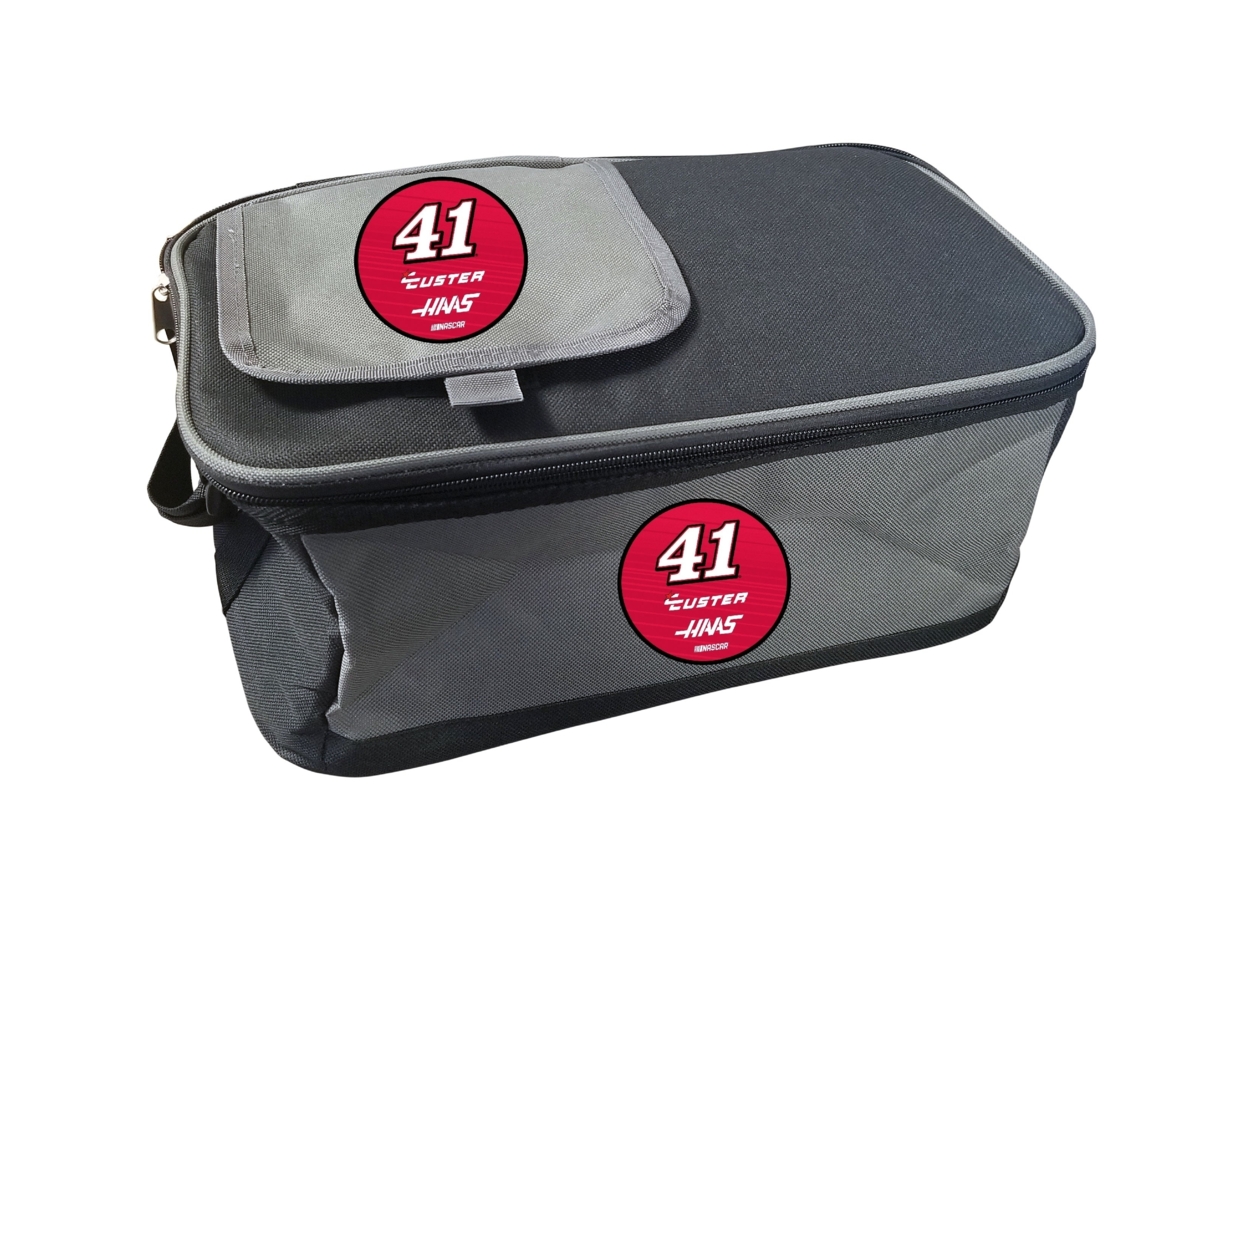 R And R Imports Cole Custer #41 Officially Licensed NASCAR 9 Pack Cooler New For 2020